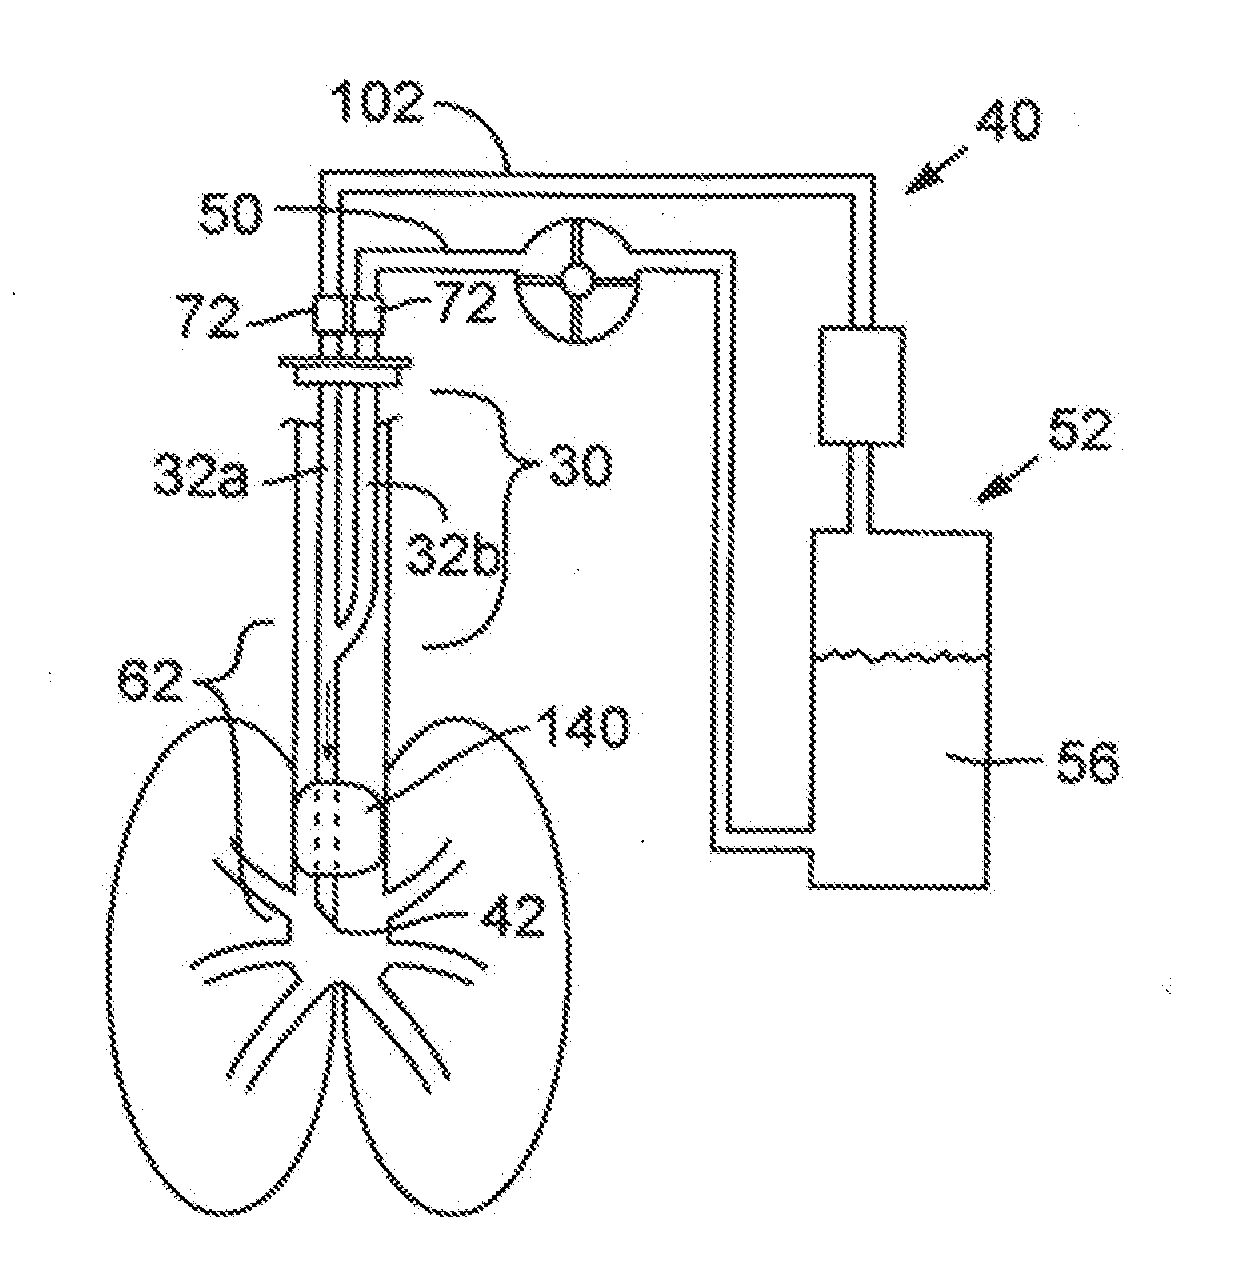 Secretion clearing ventilation catheter and airway management system